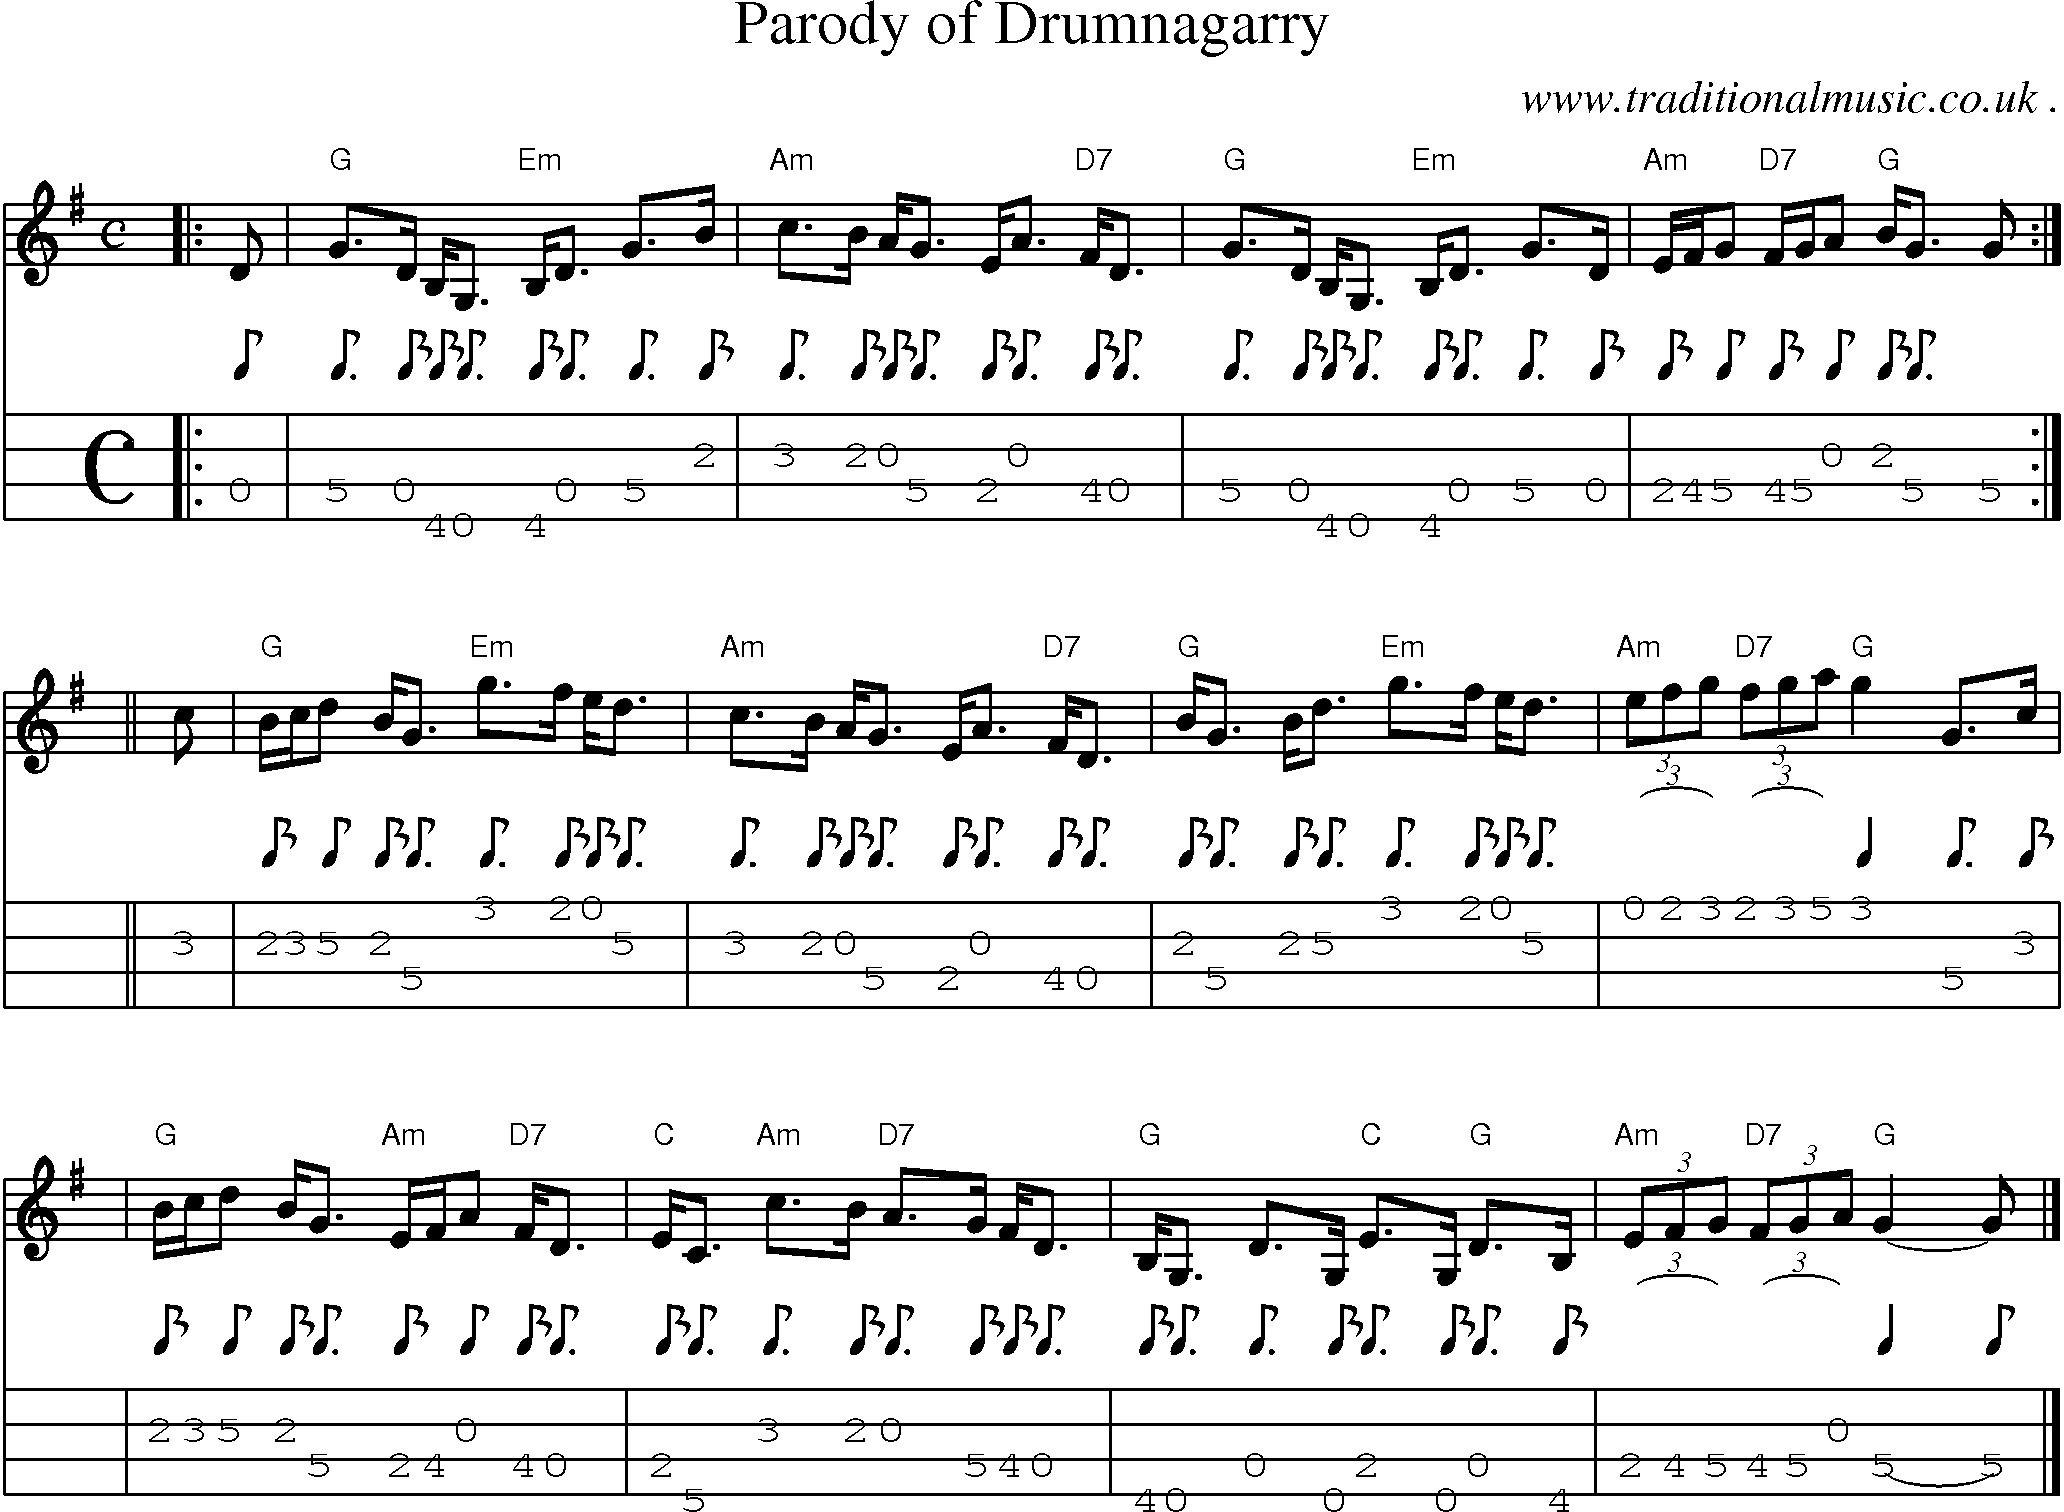 Sheet-music  score, Chords and Mandolin Tabs for Parody Of Drumnagarry